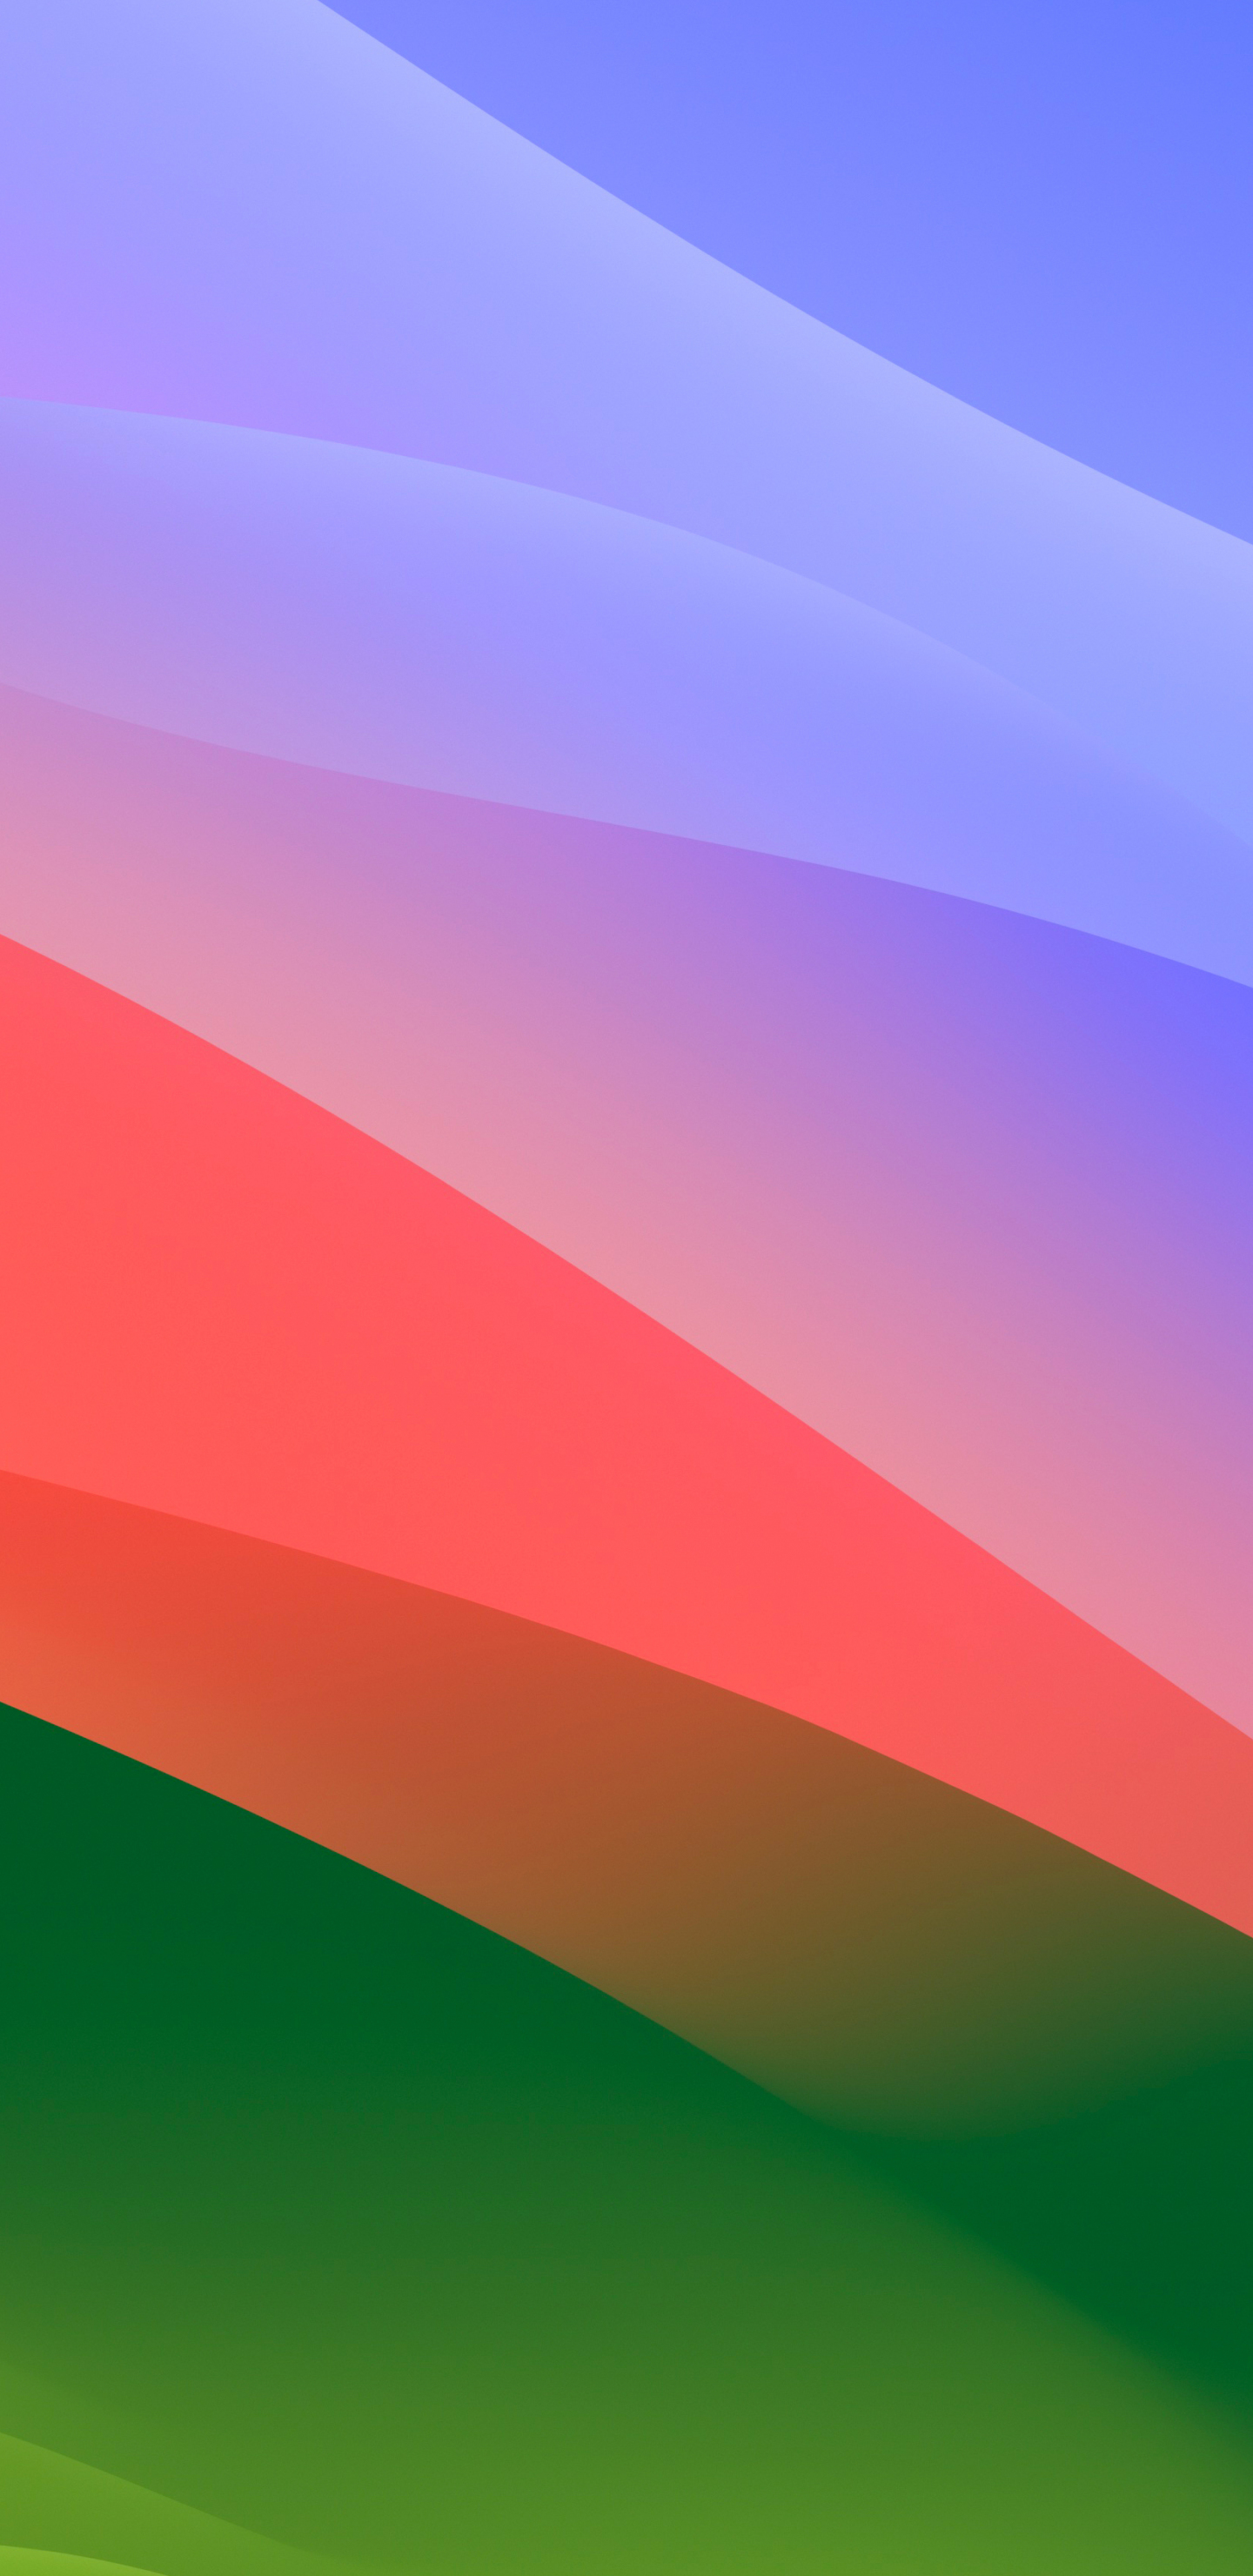 MacOS Sonoma, colorful waves, stock photo, 1440x2960 wallpaper